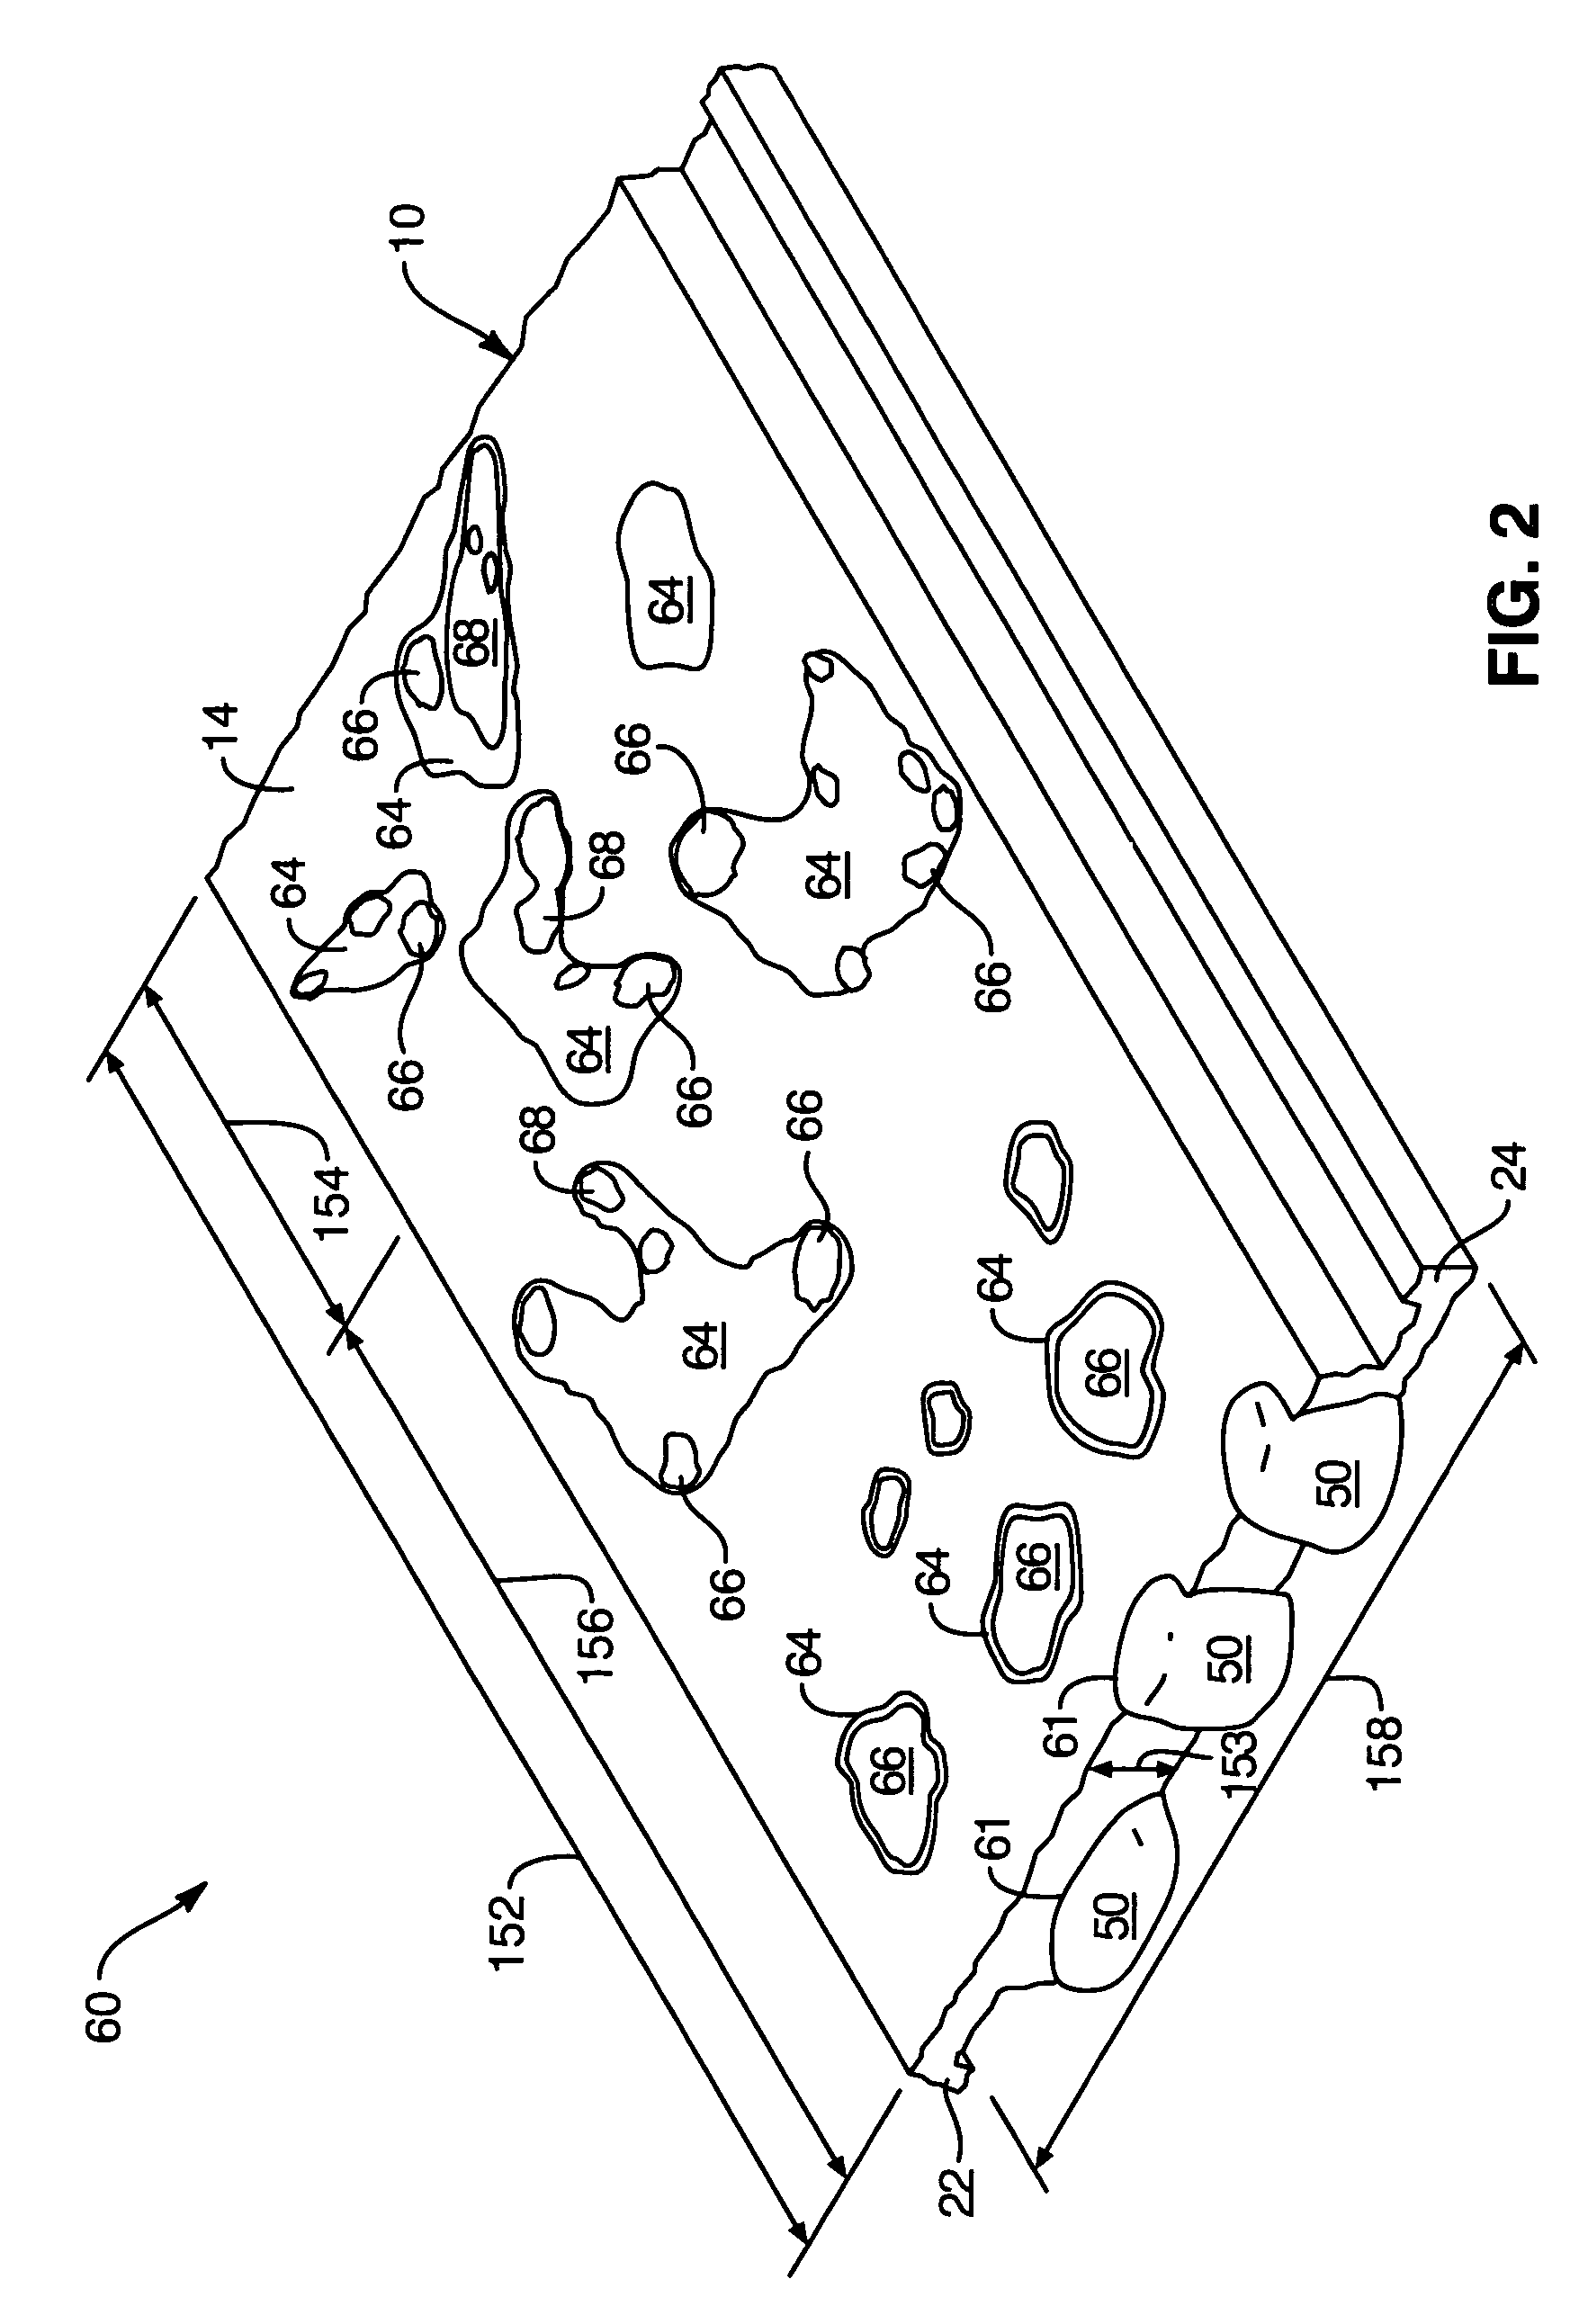 Aged roofing tile system